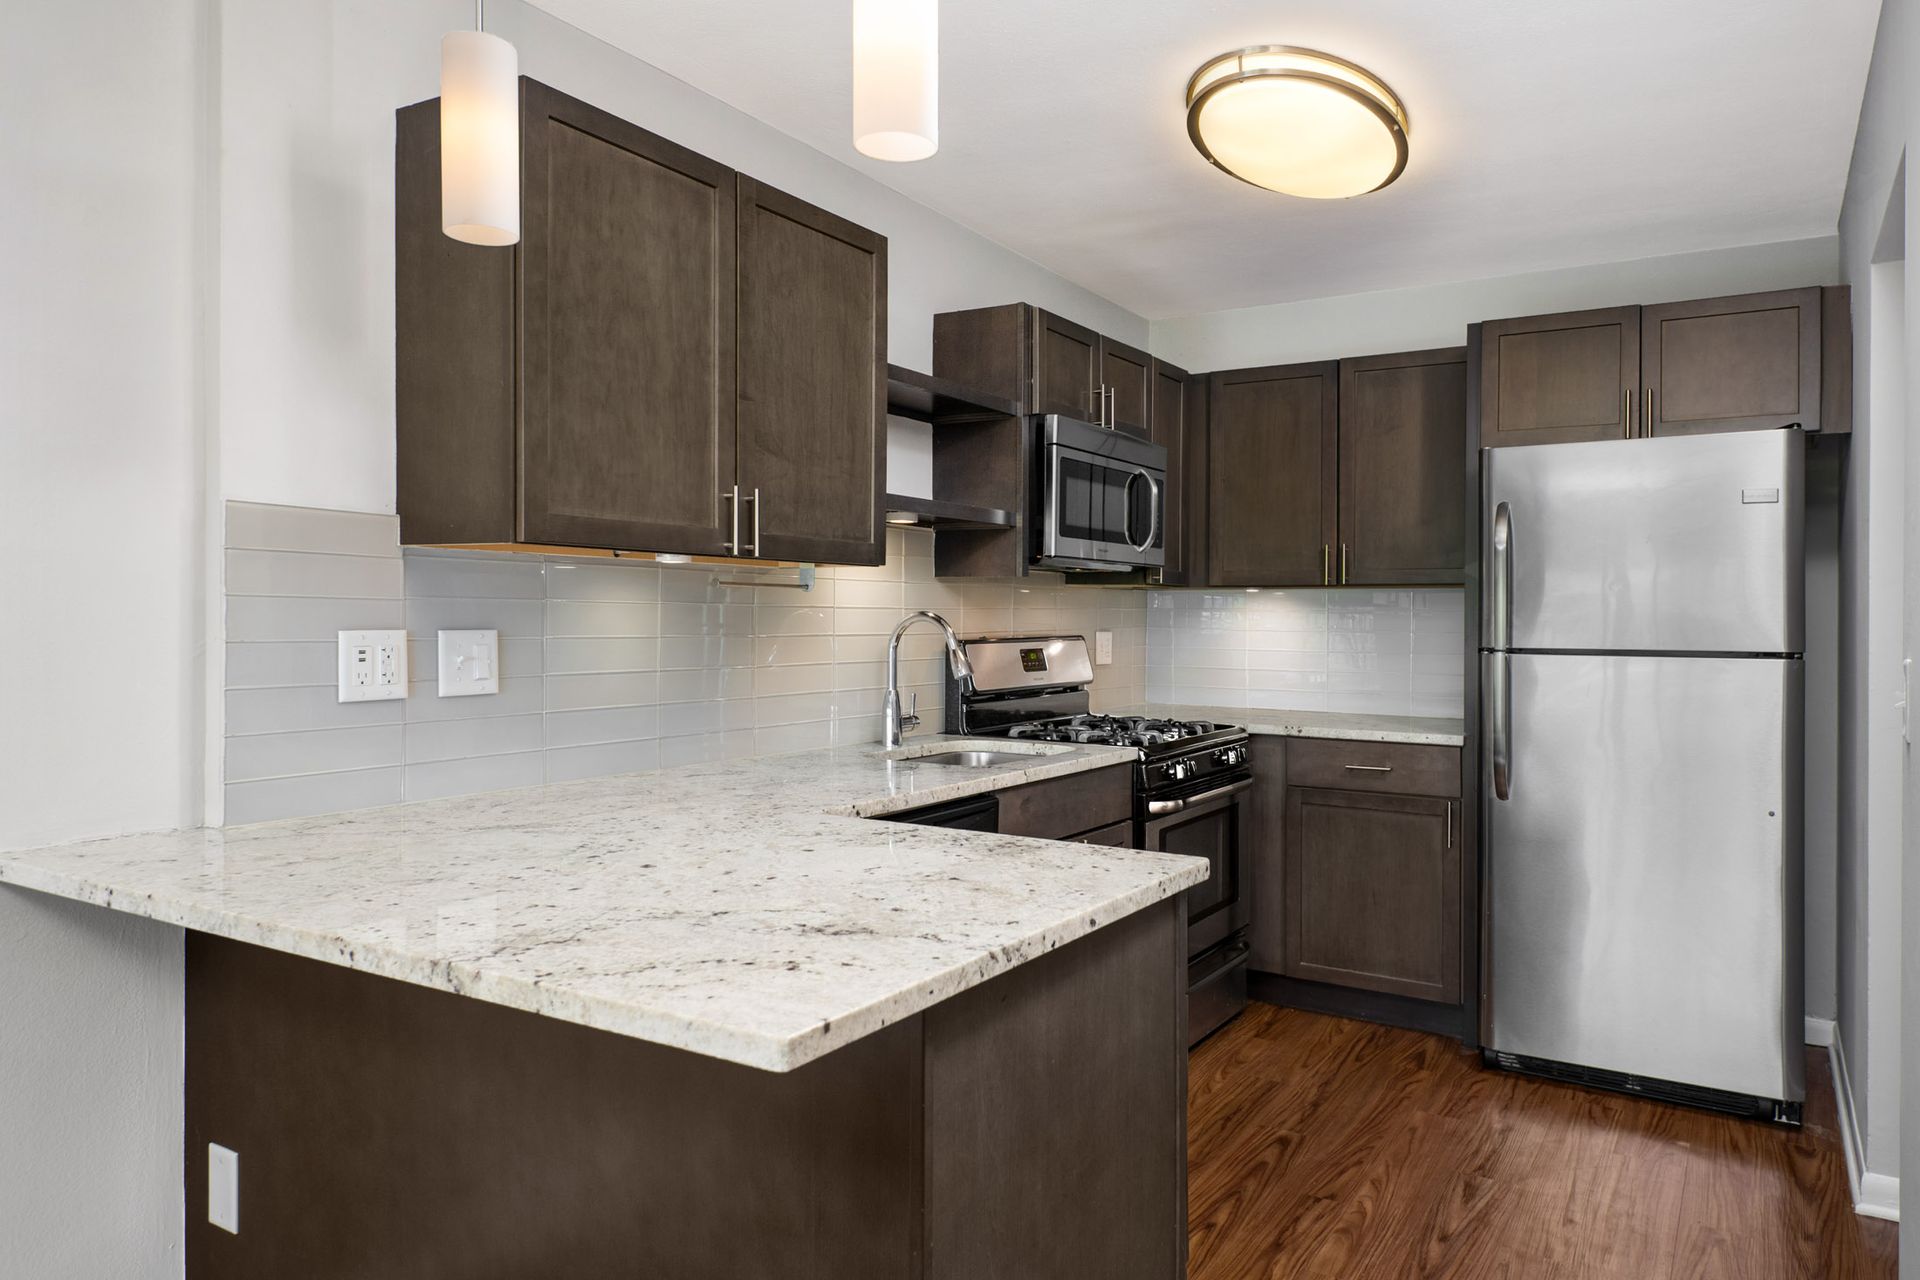 A kitchen with stainless steel appliances and granite counter tops at Reside on North Park.